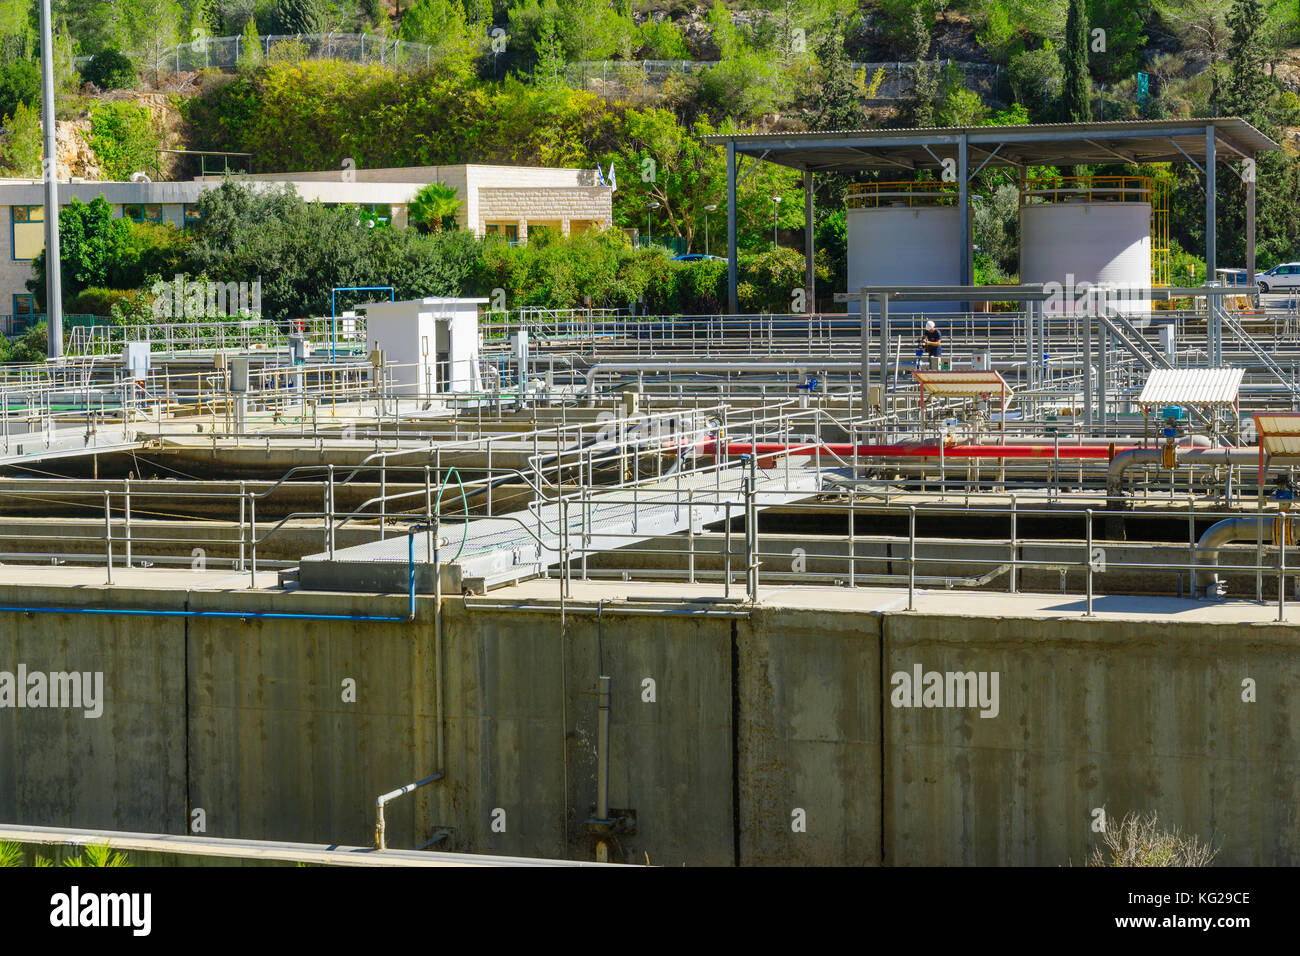 JERUSALEM, ISRAEL - OCTOBER 26, 2017: View of a Sewage Treatment Plant, with a worker, in the Sorek Valley, near Jerusalem, Israel Stock Photo